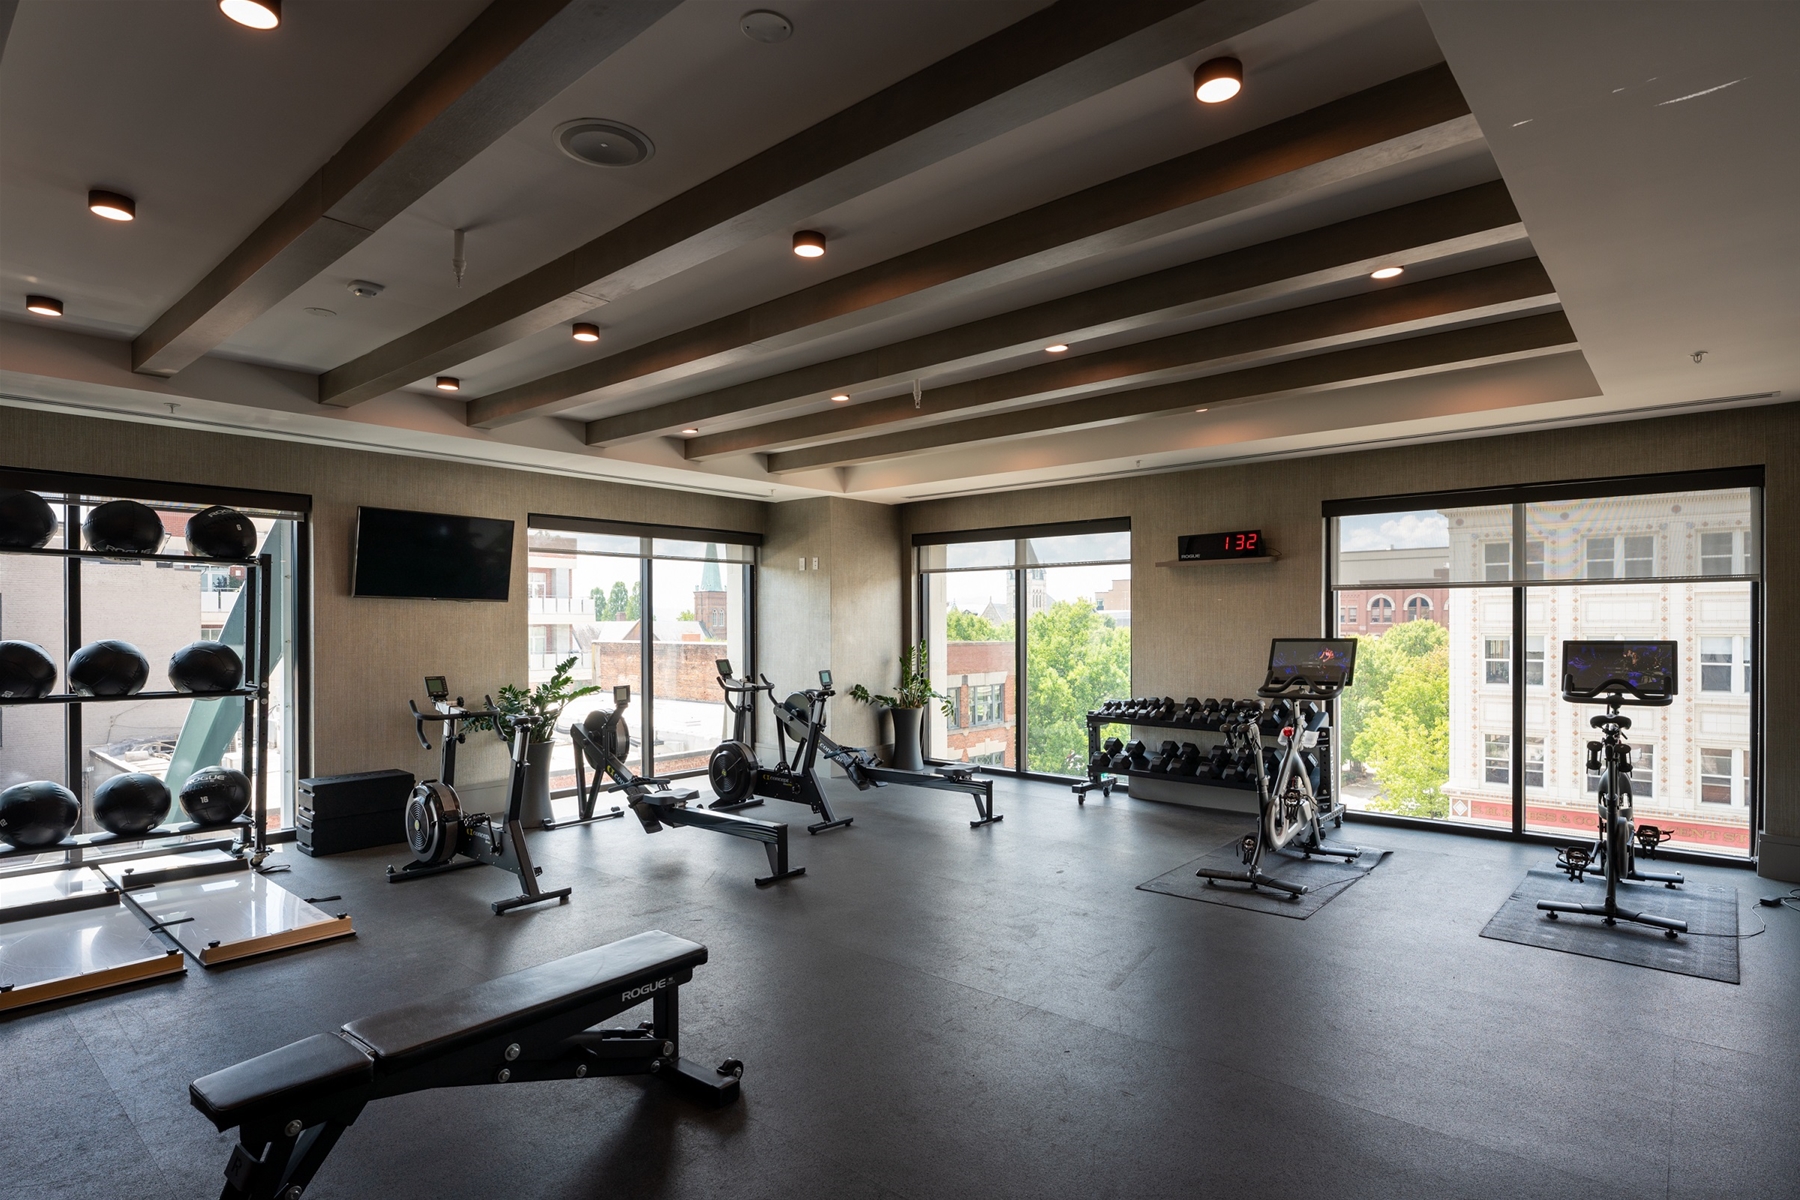 Building Gym located on the third floor of the Arras Building Arras Vacation Rentals